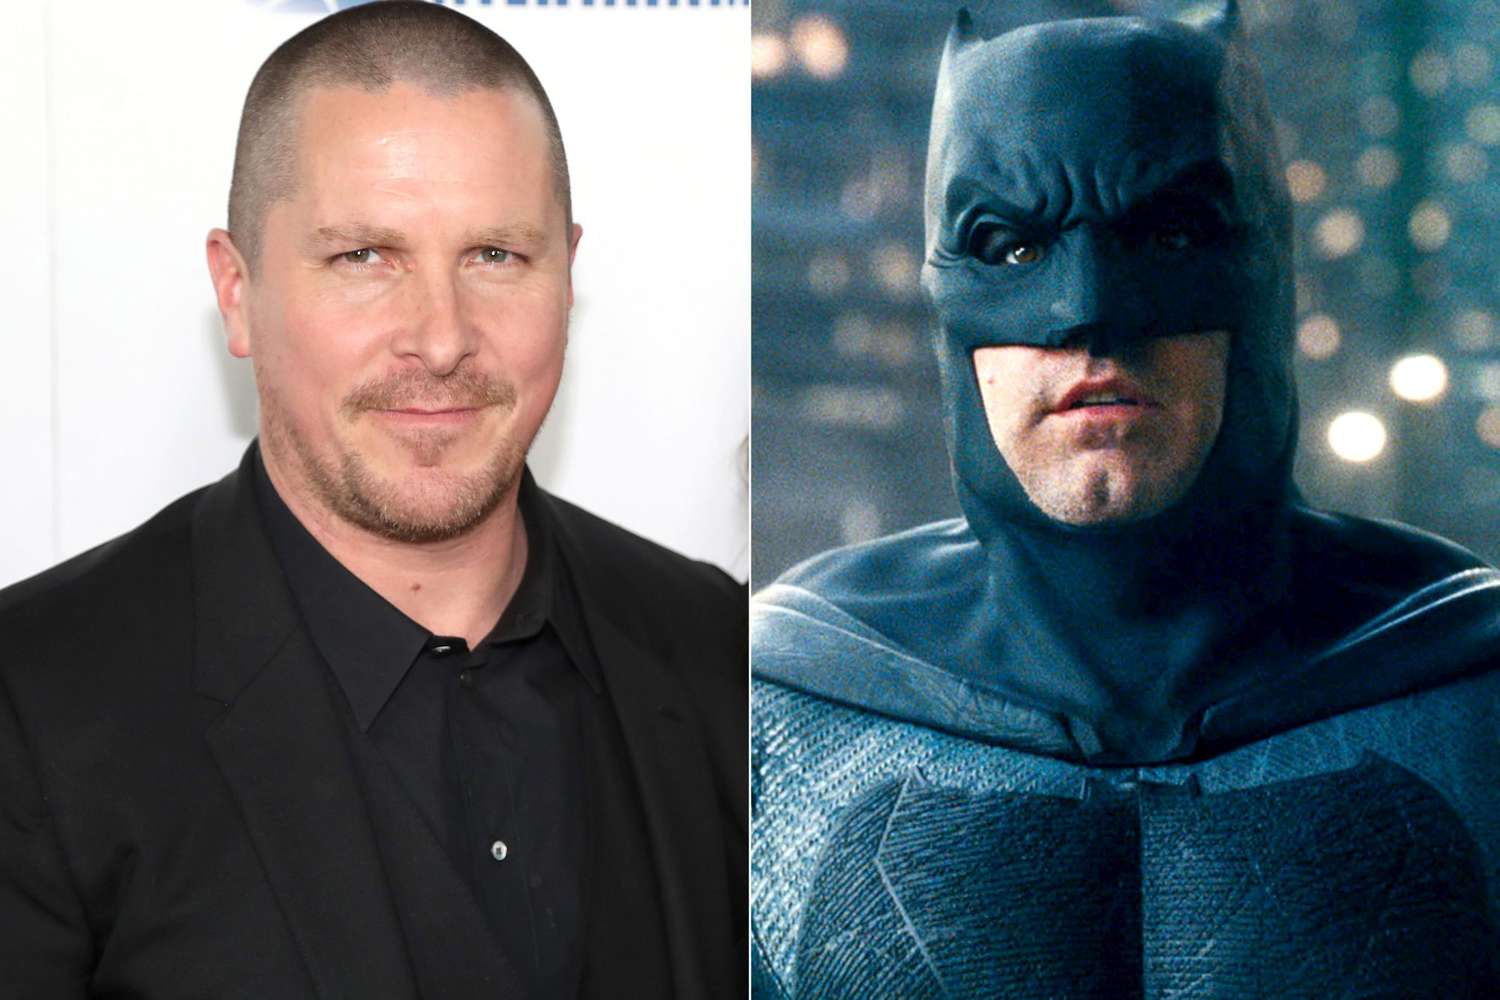 Christian Bale's Unexpected Role: When the Actor Met Trump as Batman on Set